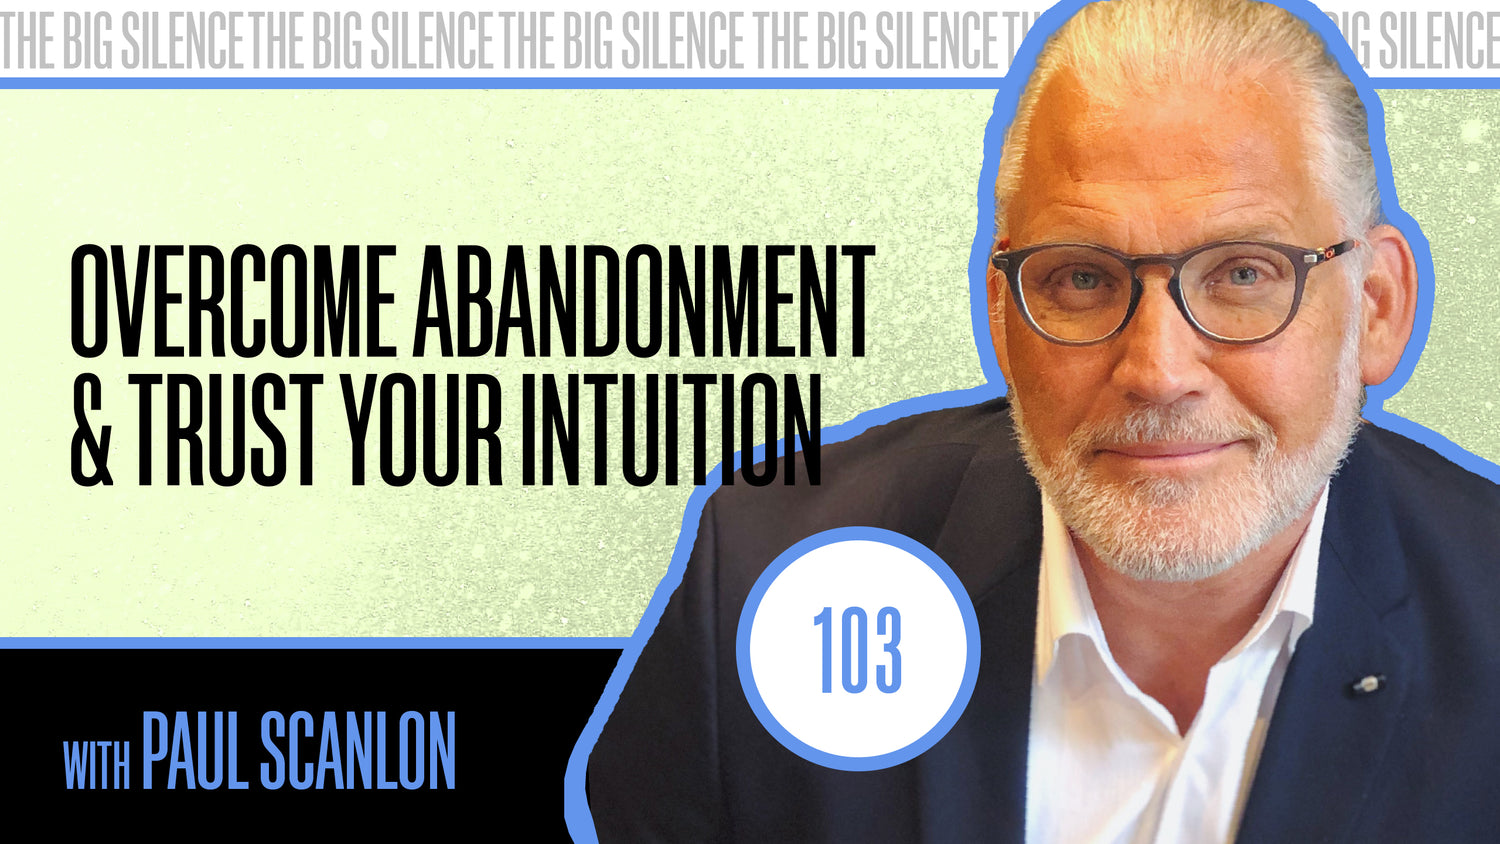 103. COME HOME TO YOU! PAUL SCANLON TEACHES US TO OVERCOME ABANDONMENT & TRUST OUR ENERGY RADAR